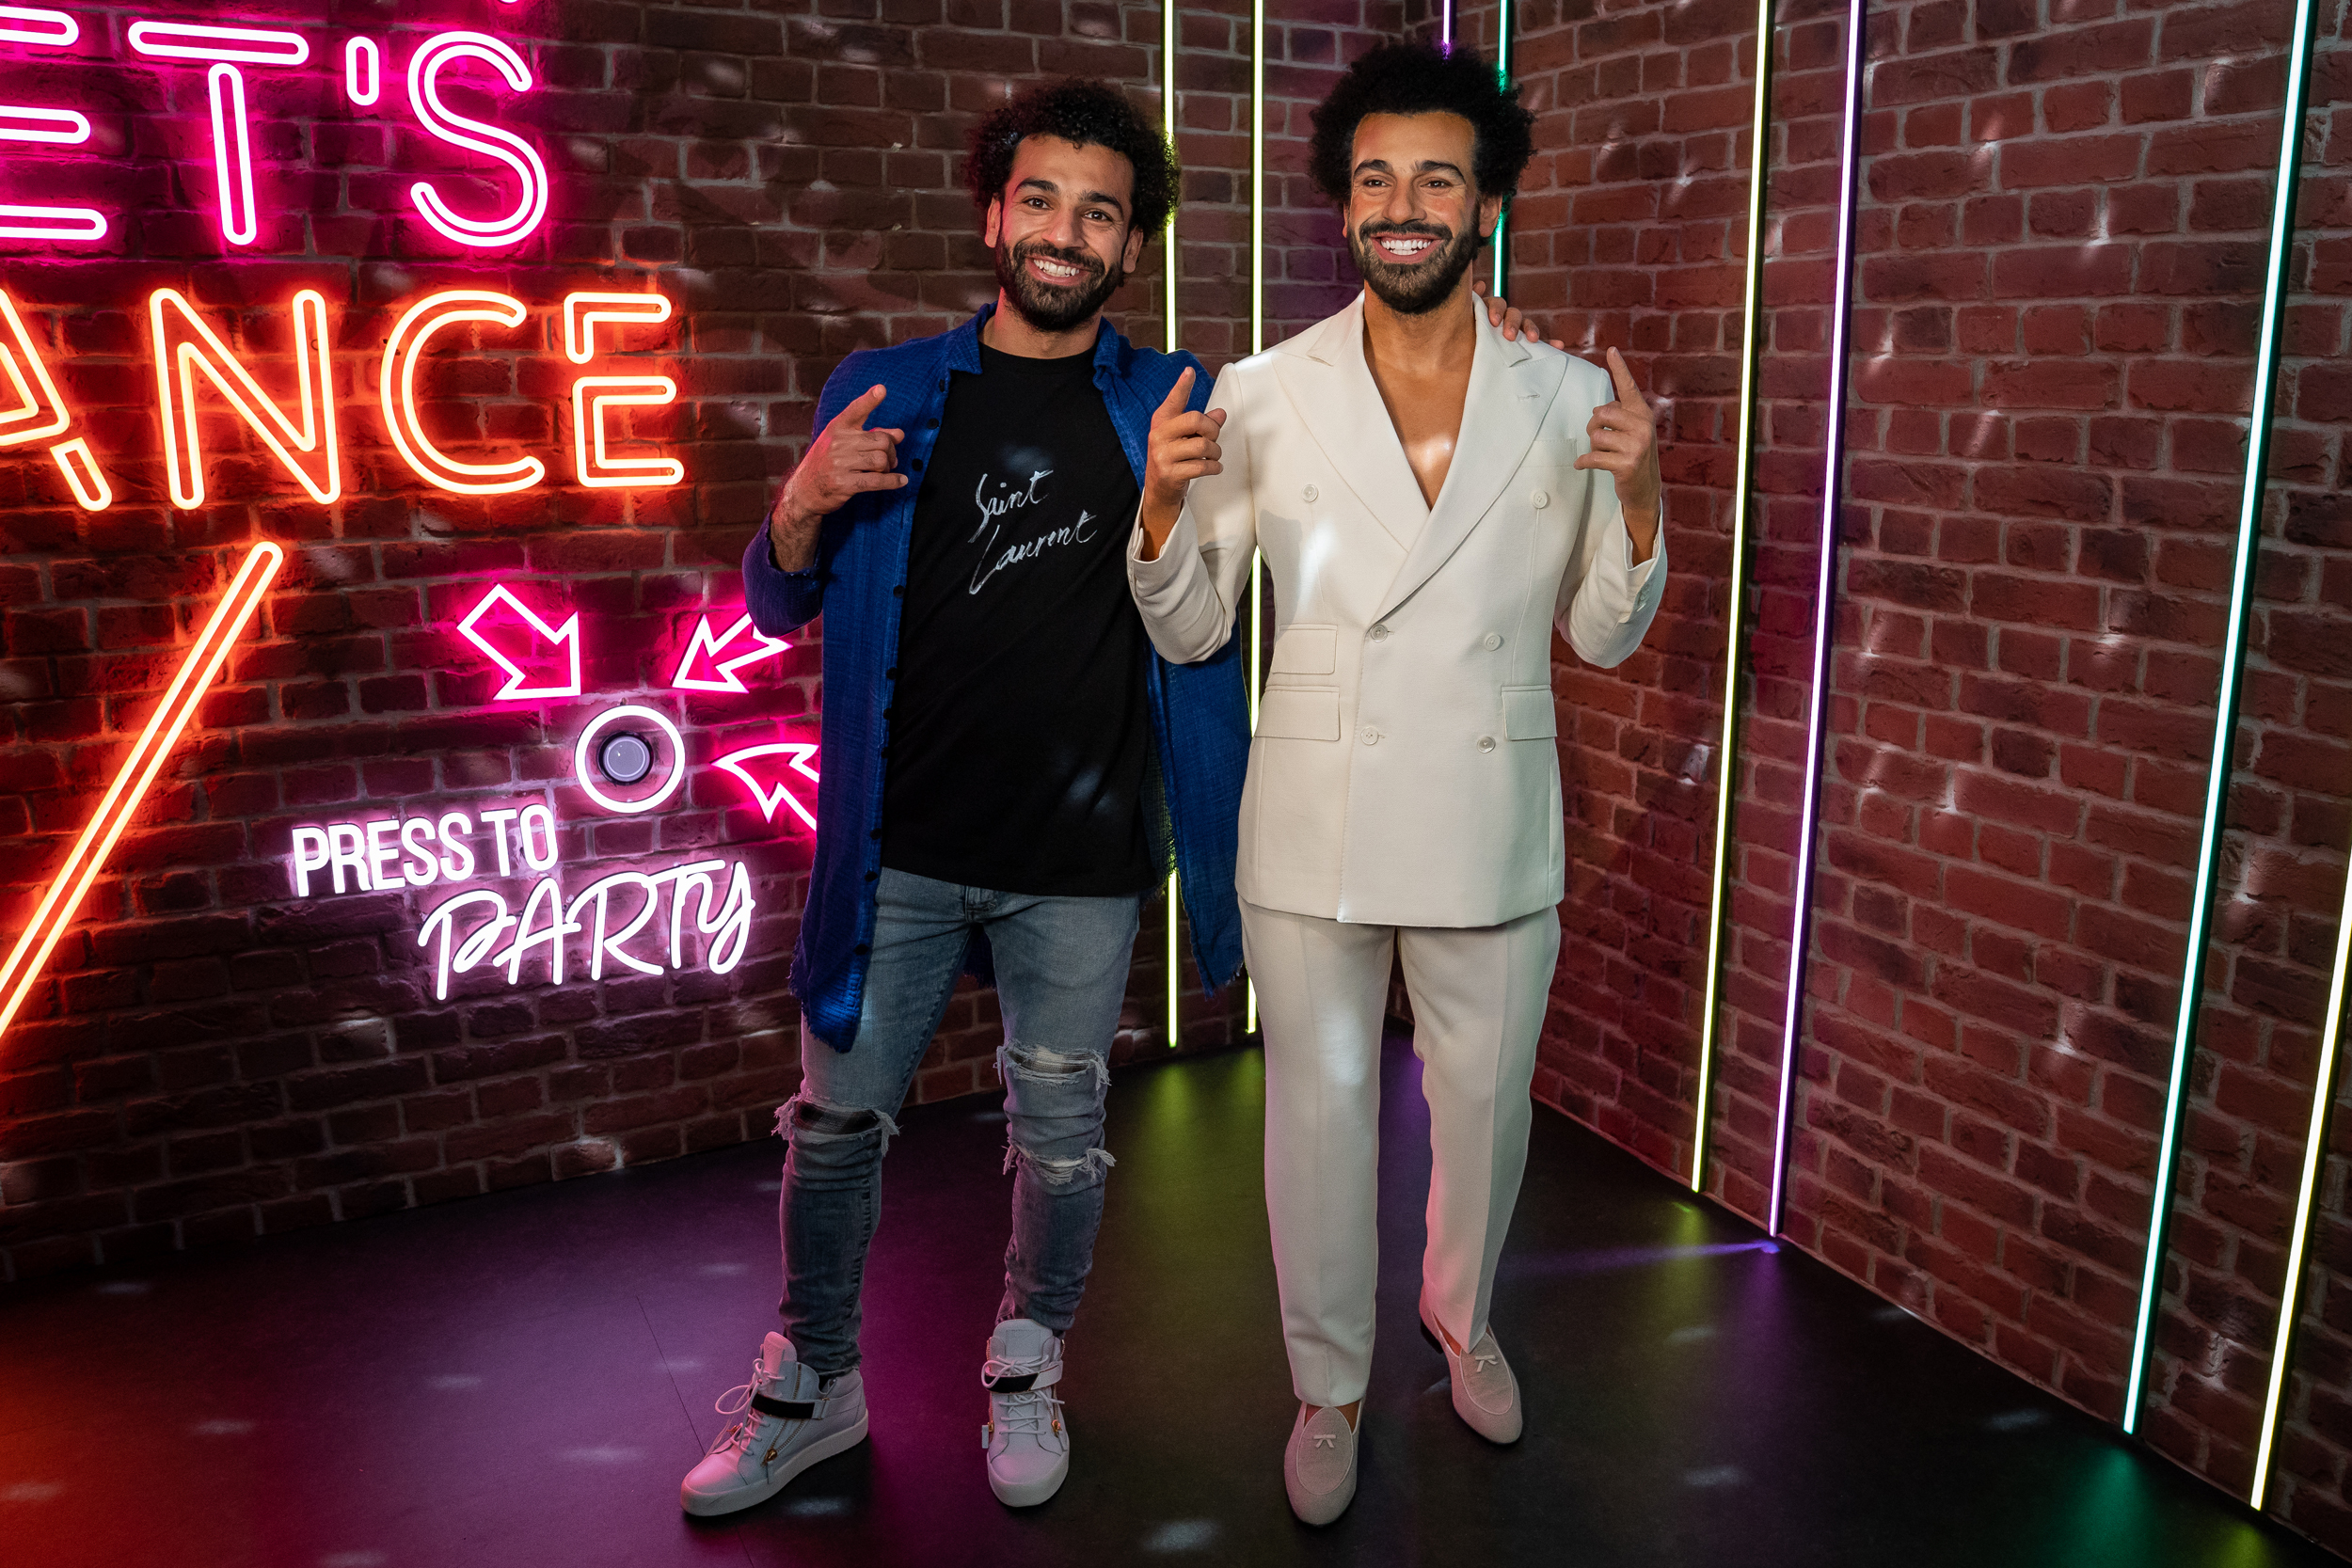 Liverpool footballer Mohamed Salah at the unveiling of the new figure of himself at Madame Tussauds London